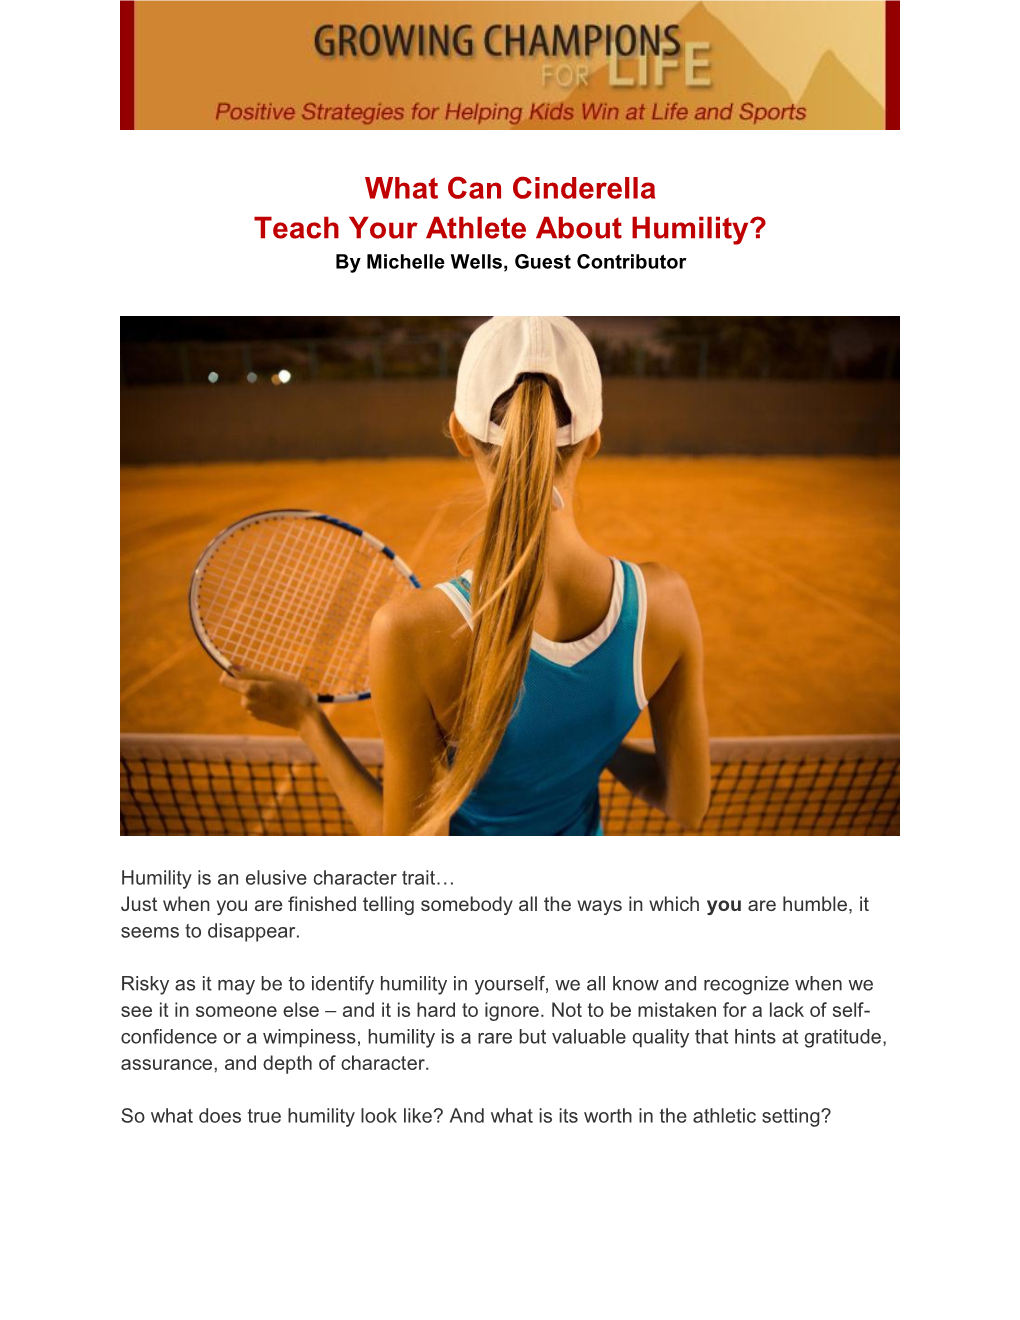 What Can Cinderella Teach Your Athlete About Humility? (PDF)